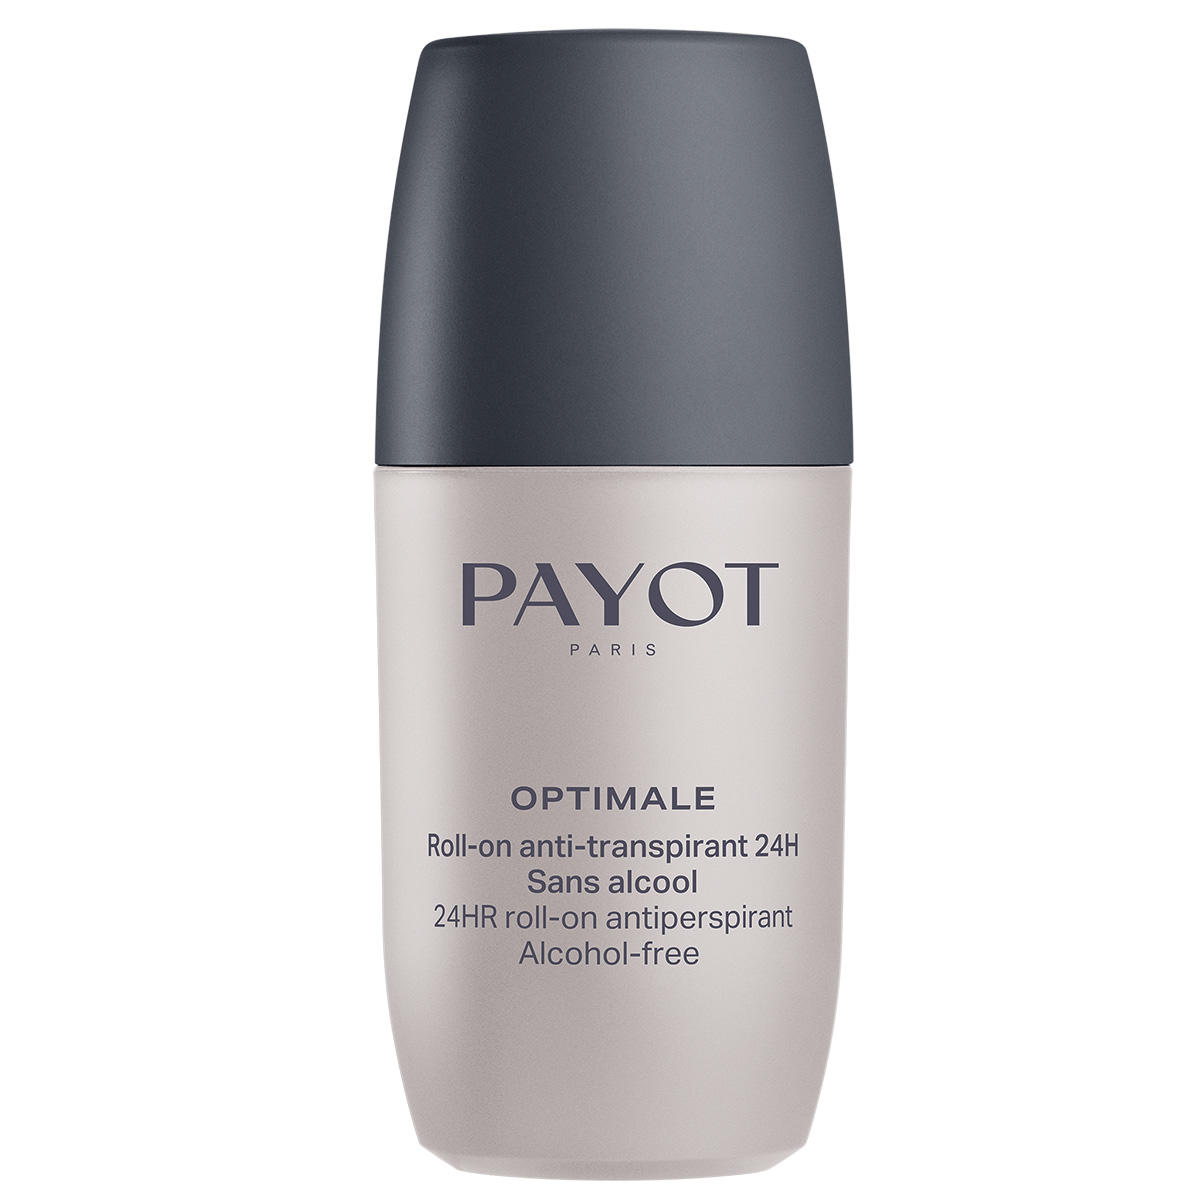 Payot Optimale Roll-on anti-transpirant 24H 75 ml - 1